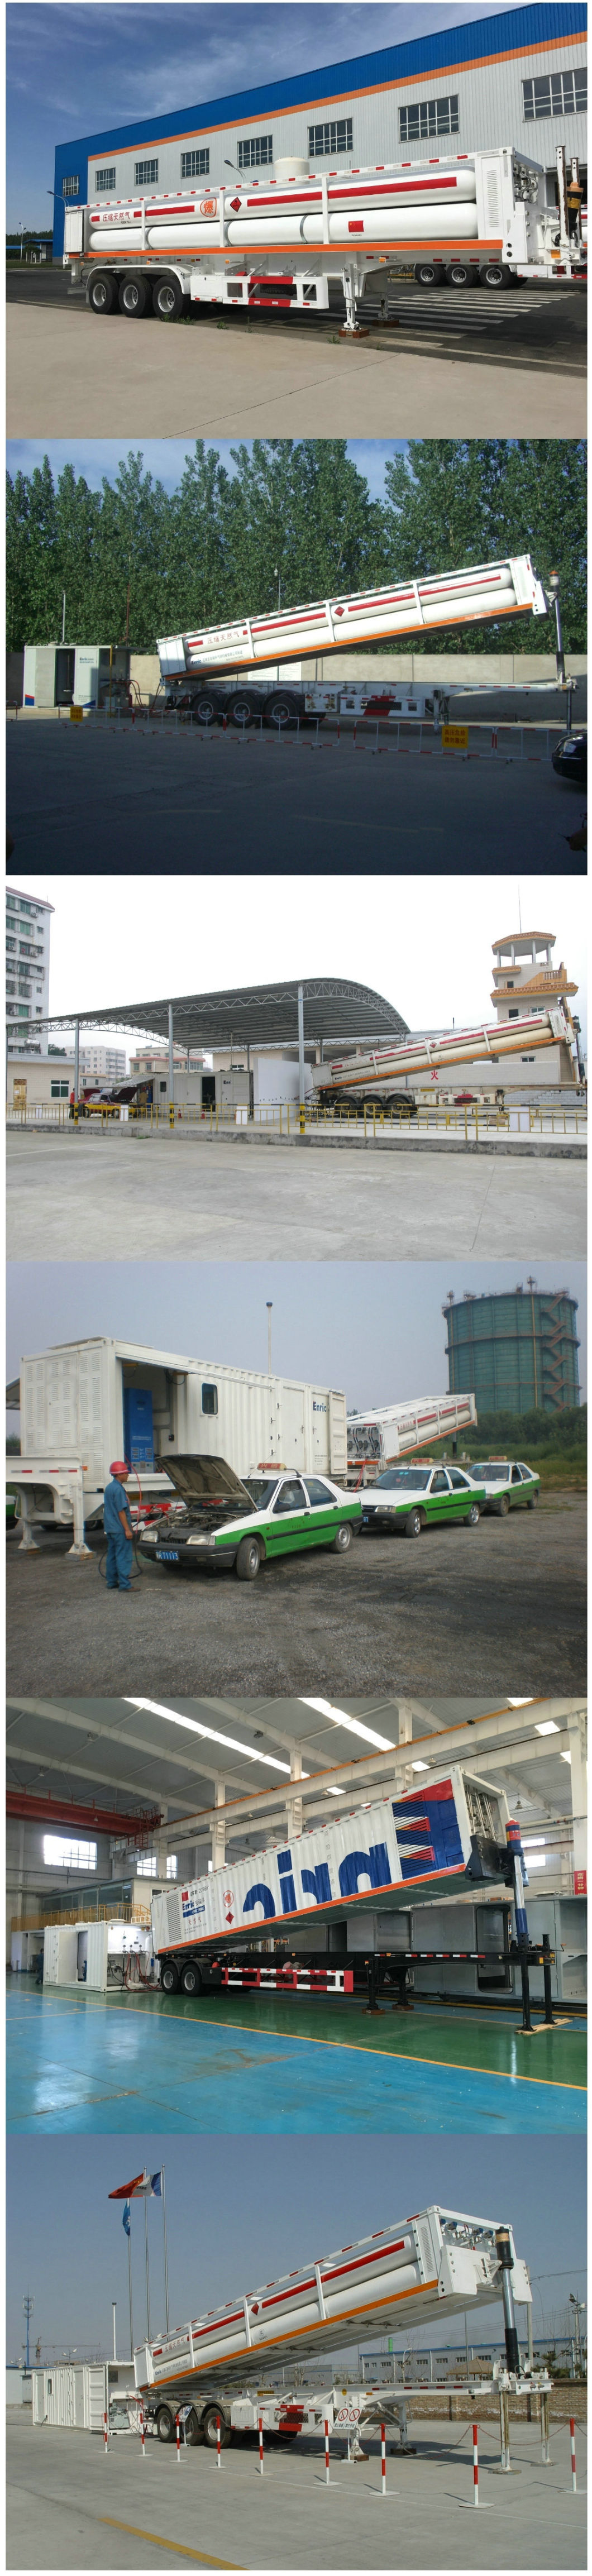 40FT CNG Tube Skid Tube Bundle Container Trailer (Hydrogen Storage Cascade, Compressed Natural Gas Jumbo Tube Trailer, Gaseous Hydrogen Tube Trailers)